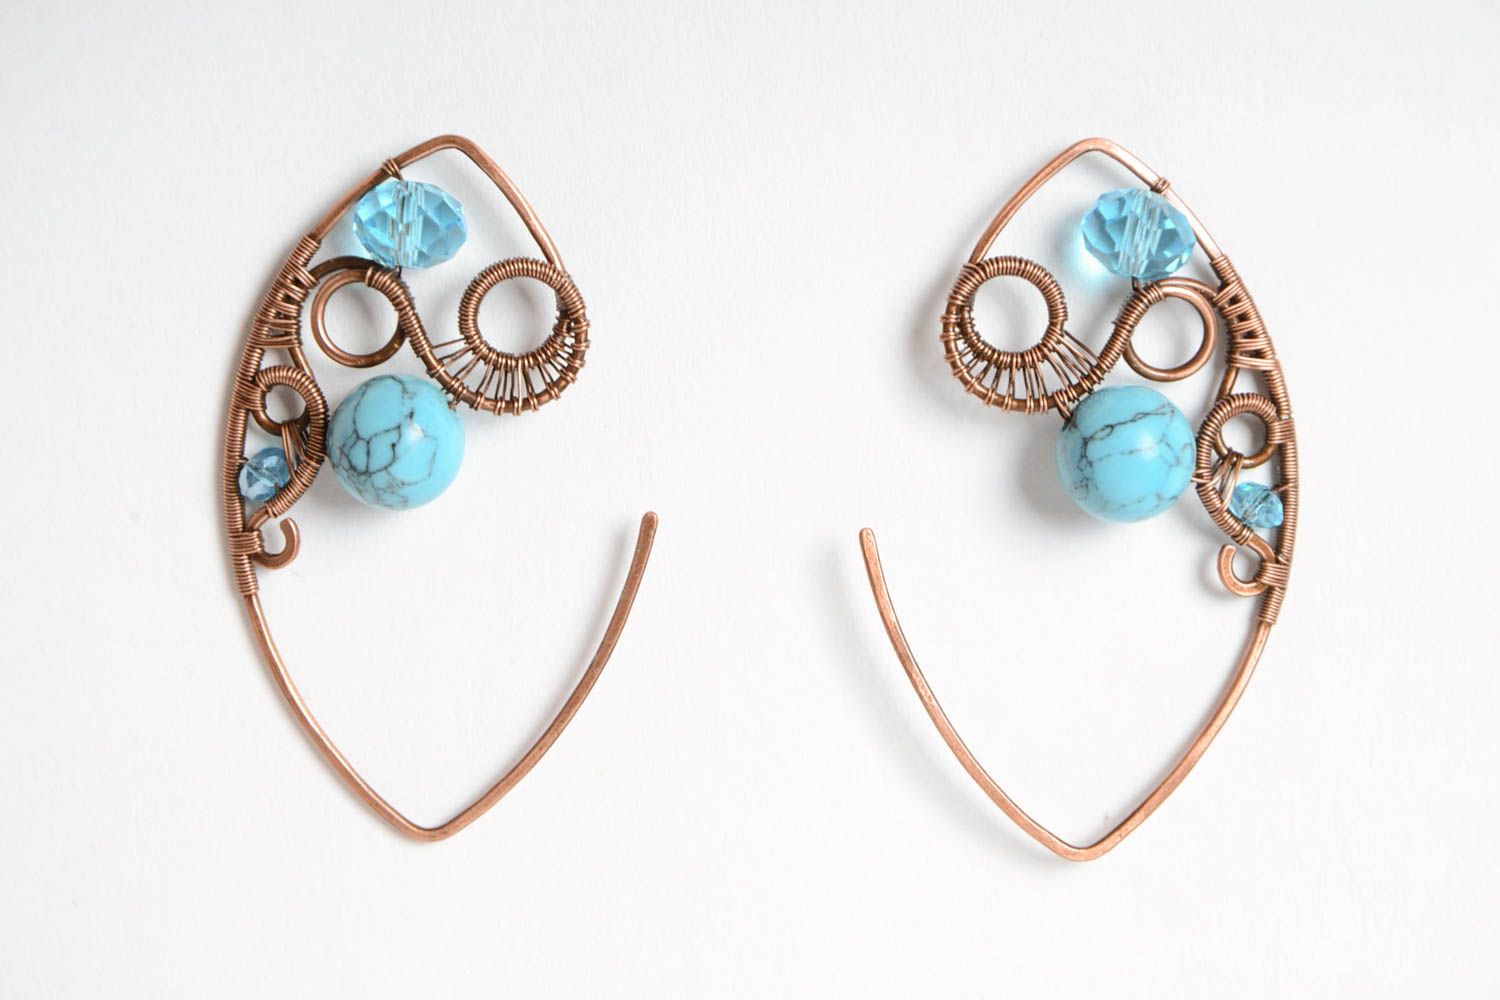 Handmade copper wire wrap earrings with natural turquoise and quartz beads photo 5